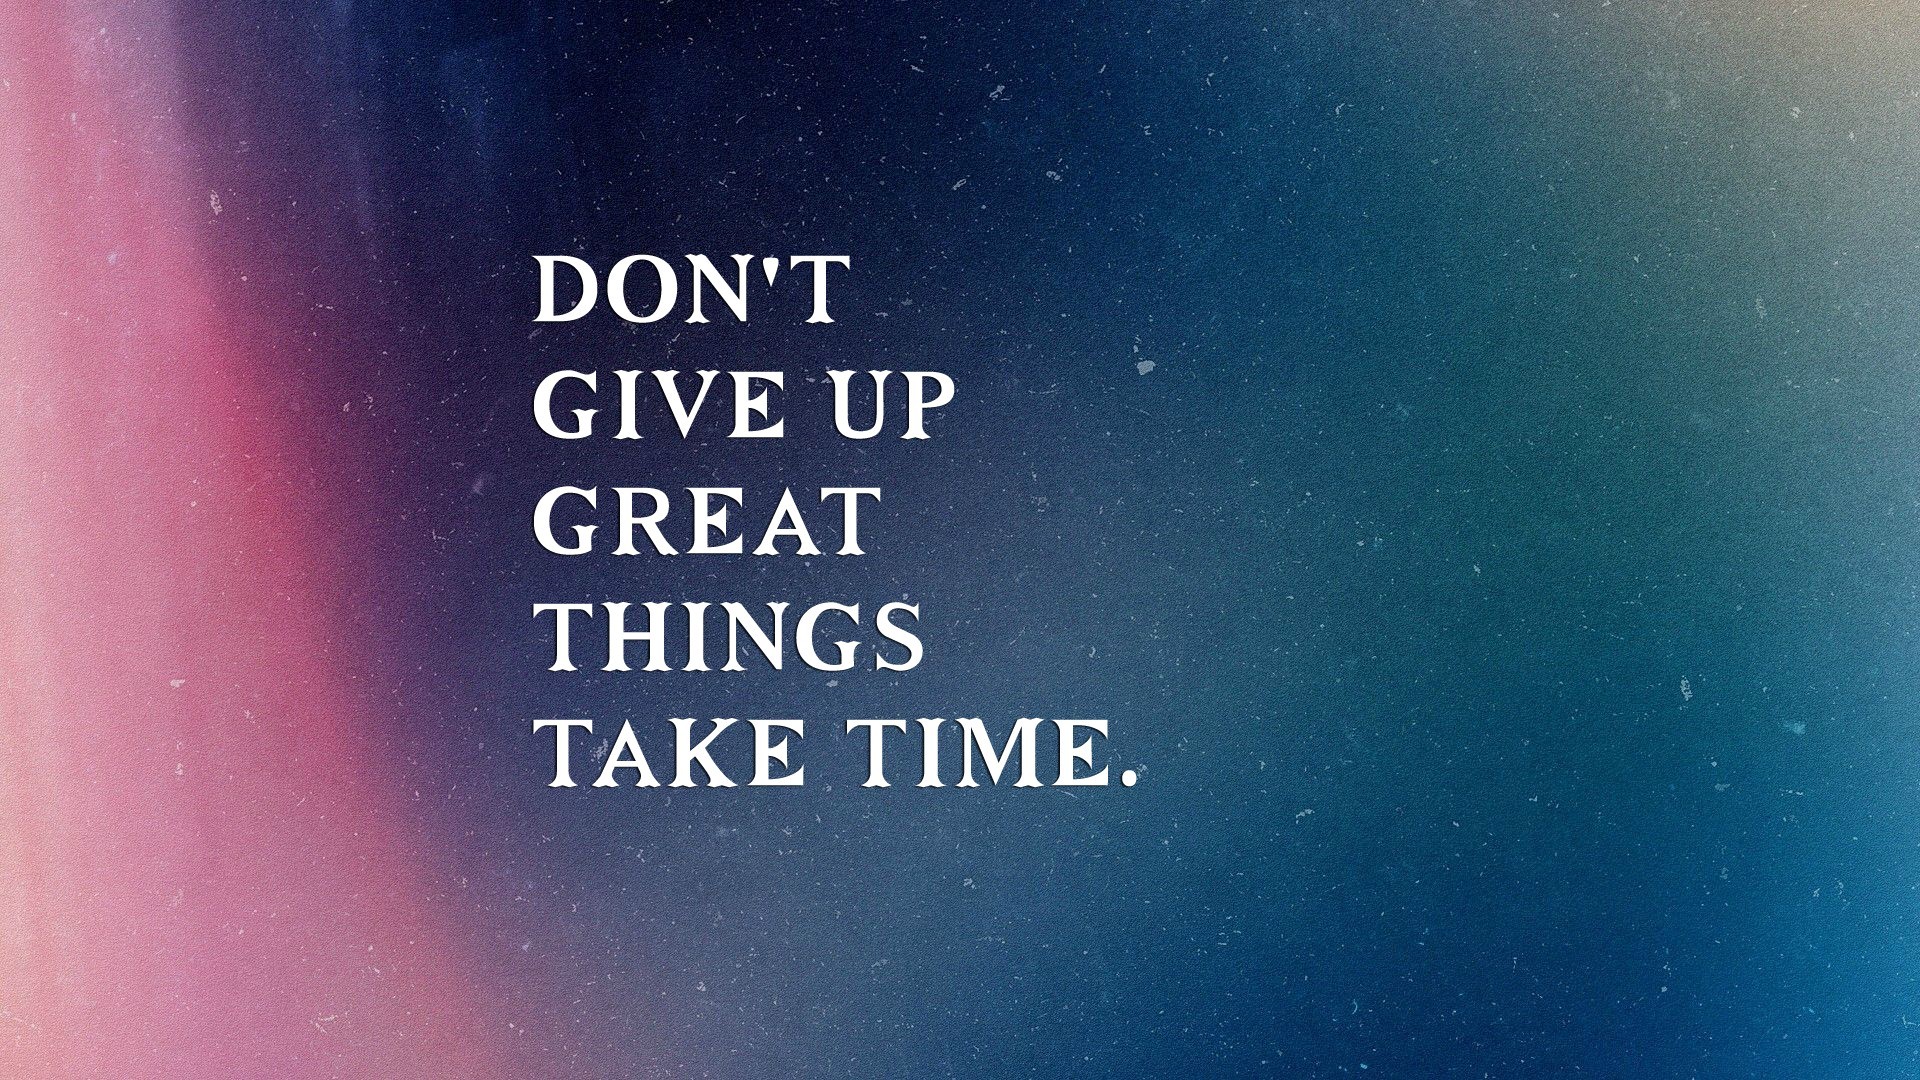 50 Best Motivational Wallpapers With Inspiring Quotes - Dont Give Up Great  Things Take Time - 1920x1080 Wallpaper 